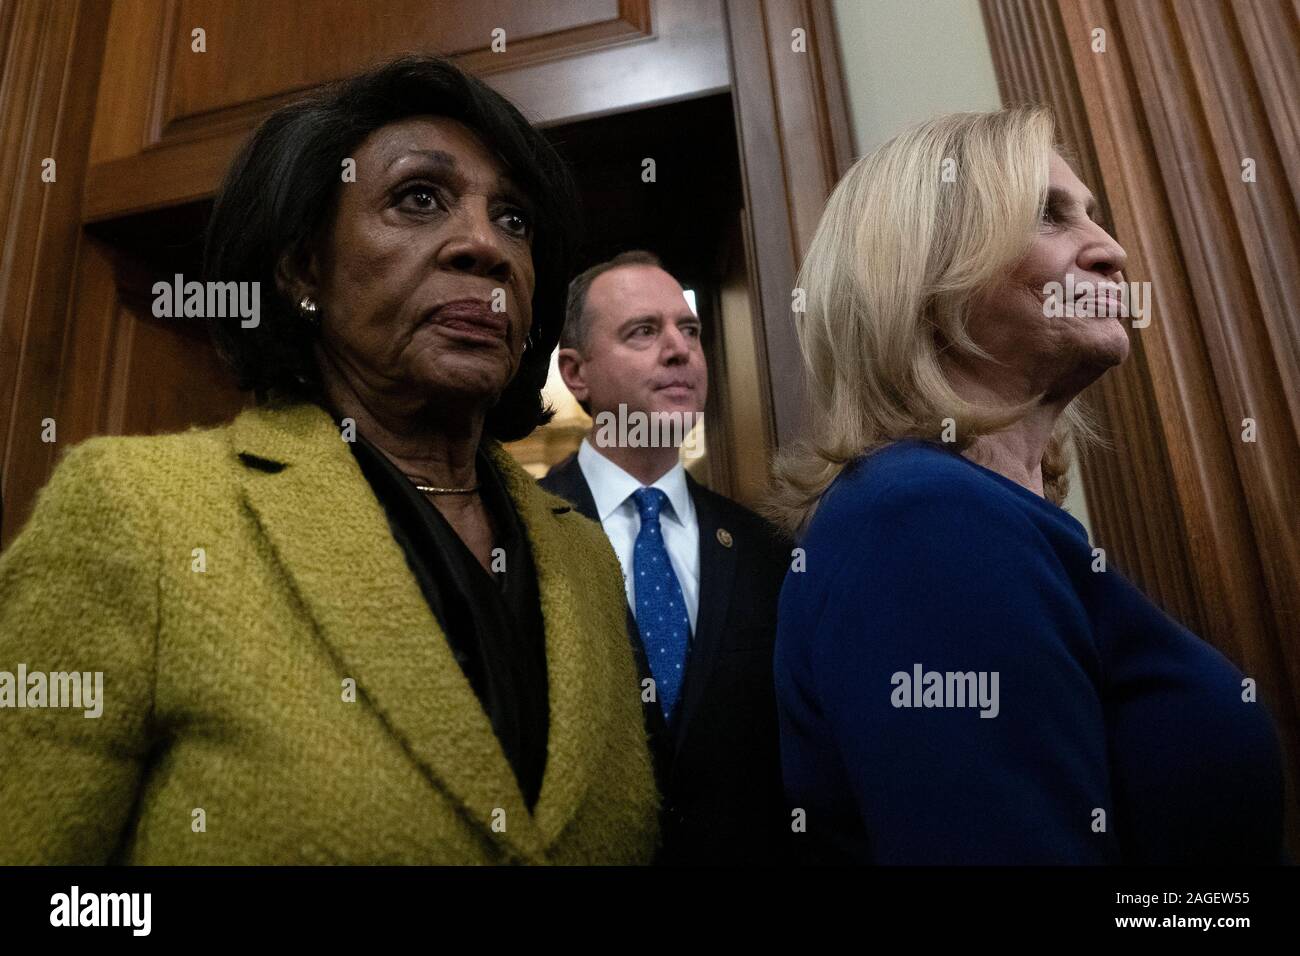 From left to right: United States Representative Maxine Waters (Democrat of California), United States Representative Adam Schiff (Democrat of California), and United States Representative Carolyn Maloney (Democrat of New York), United States enter a press conference after the United States House of Representatives voted to impeach United States President Donald J. Trump at the United States Capitol in Washington, DC, U.S., on Wednesday, December 18, 2019. Credit: Stefani Reynolds/CNP /MediaPunch Stock Photo